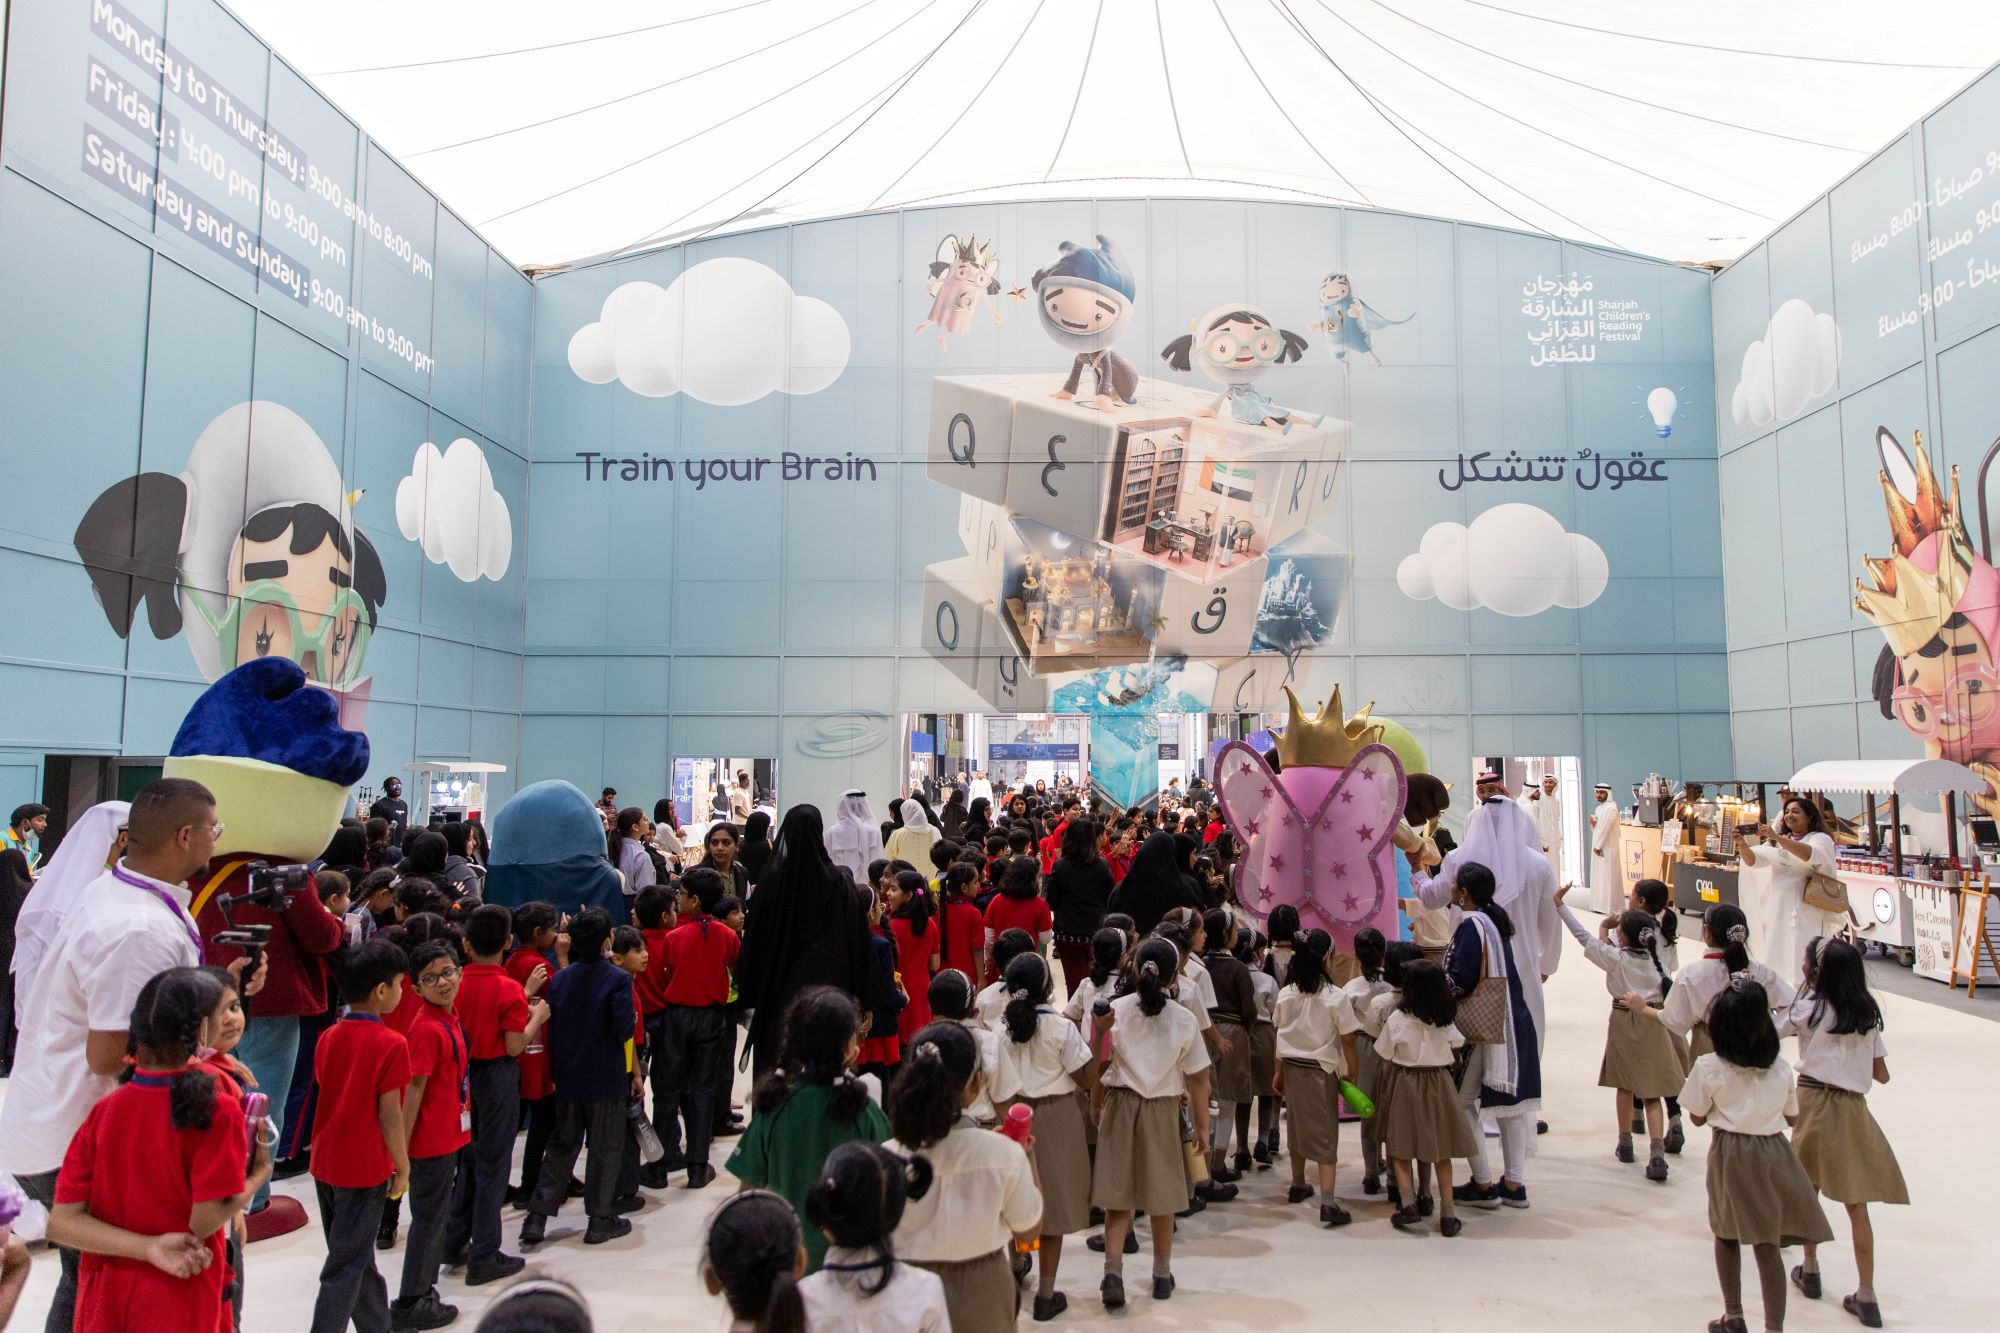 sharjah children's reading festival returns on may 1 for exciting 12-day creative feast